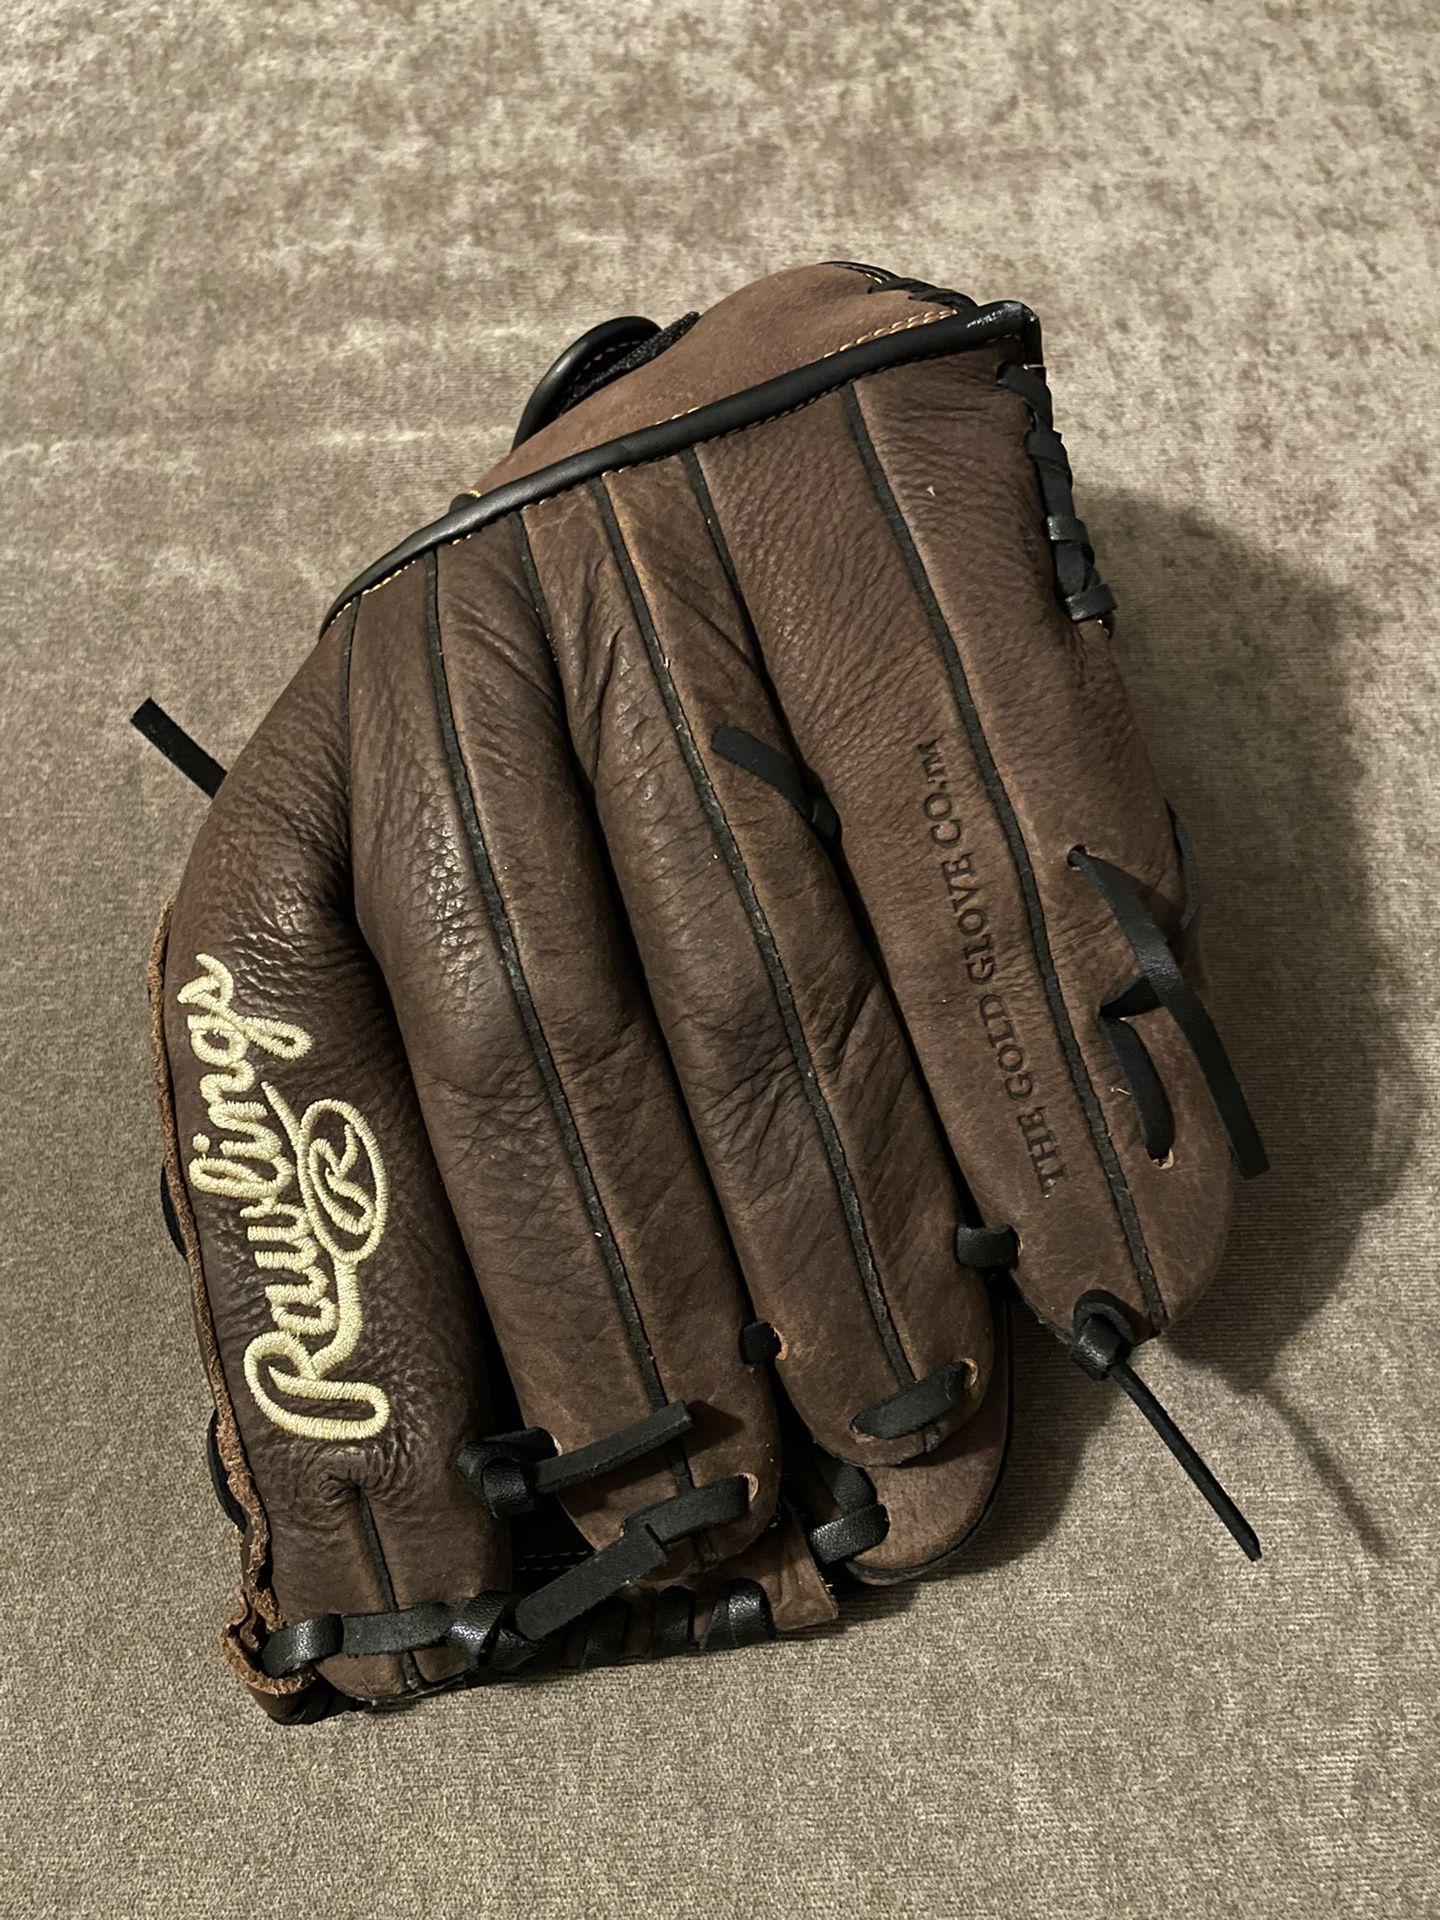 Excellent Condition Rawlings Baseball Glove 